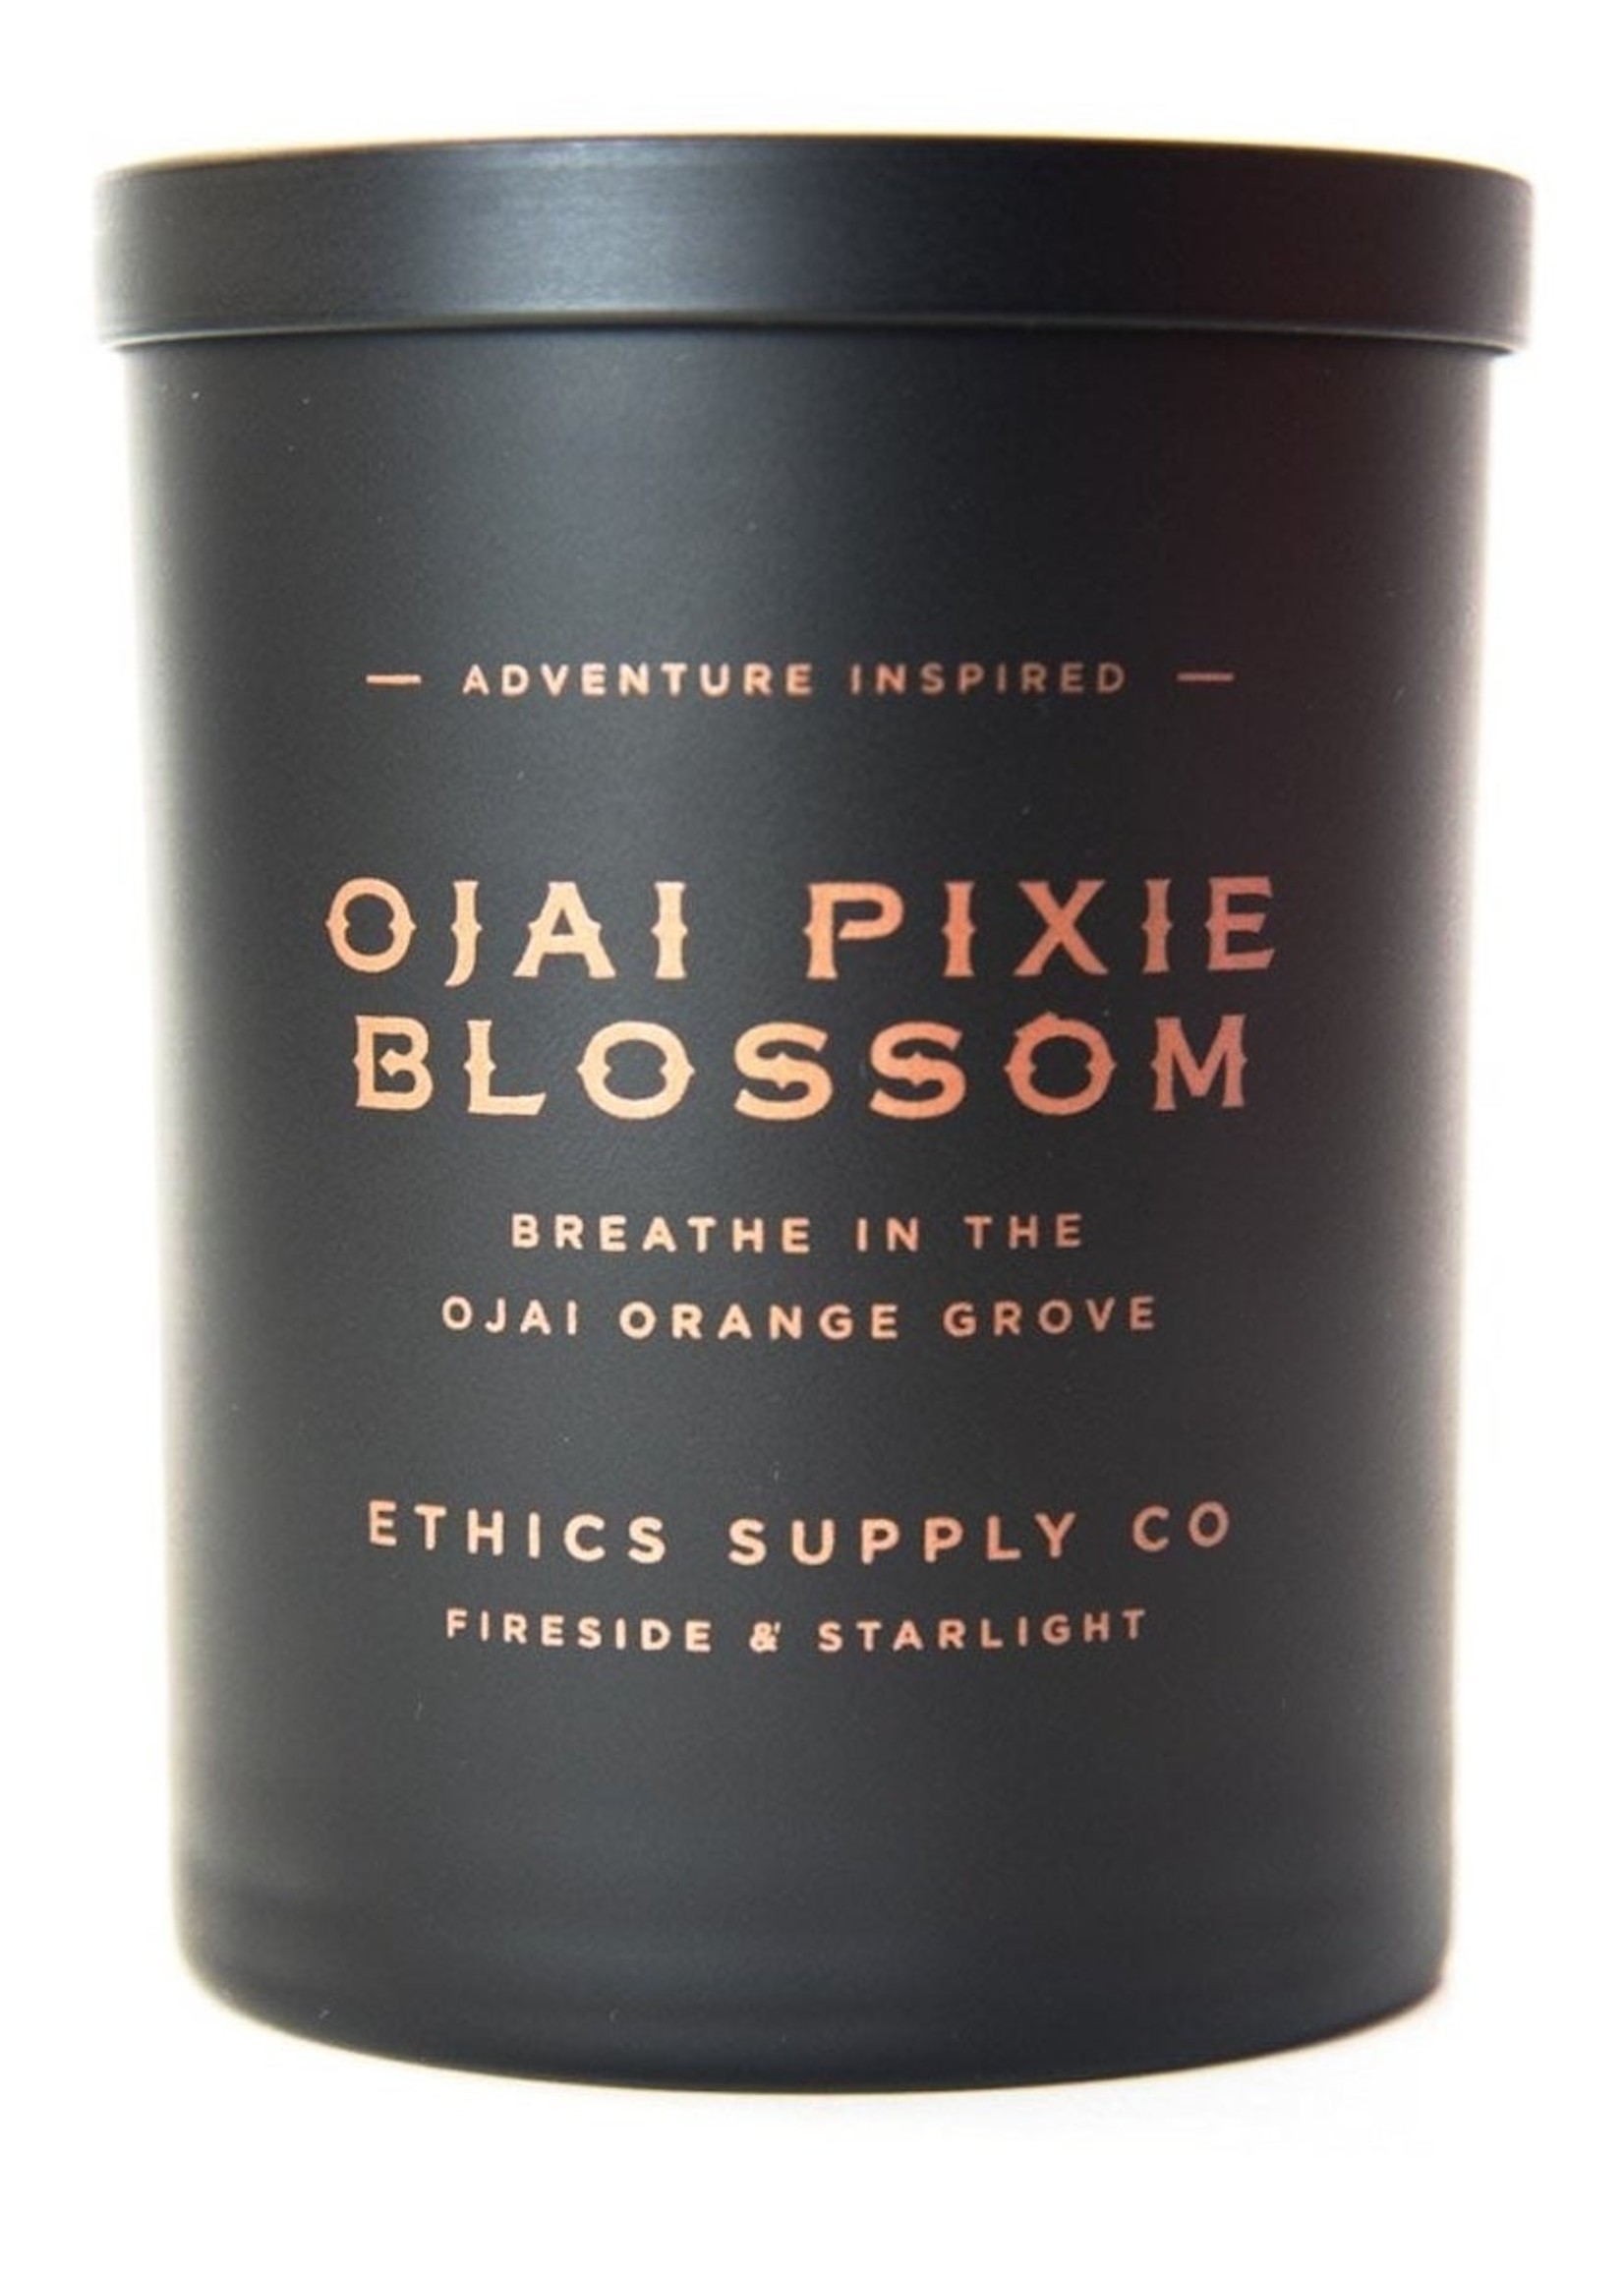 Ethics Supply Co Ethics Supply Co. Ojai Pixie Blossom Candle